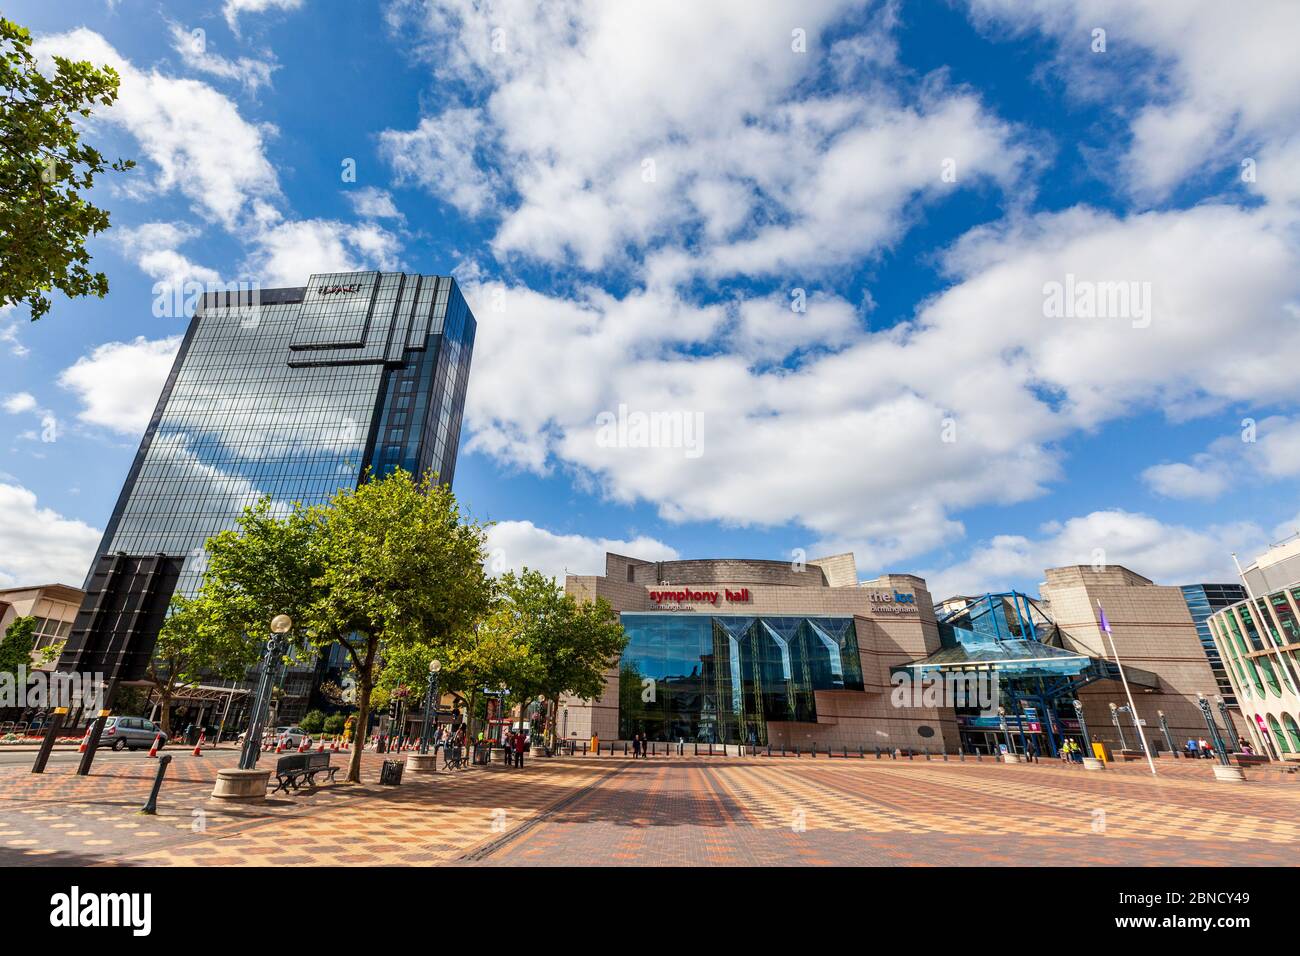 Symphony Hall and the ICC in Centenary Square, Birmingham, England Stock Photo